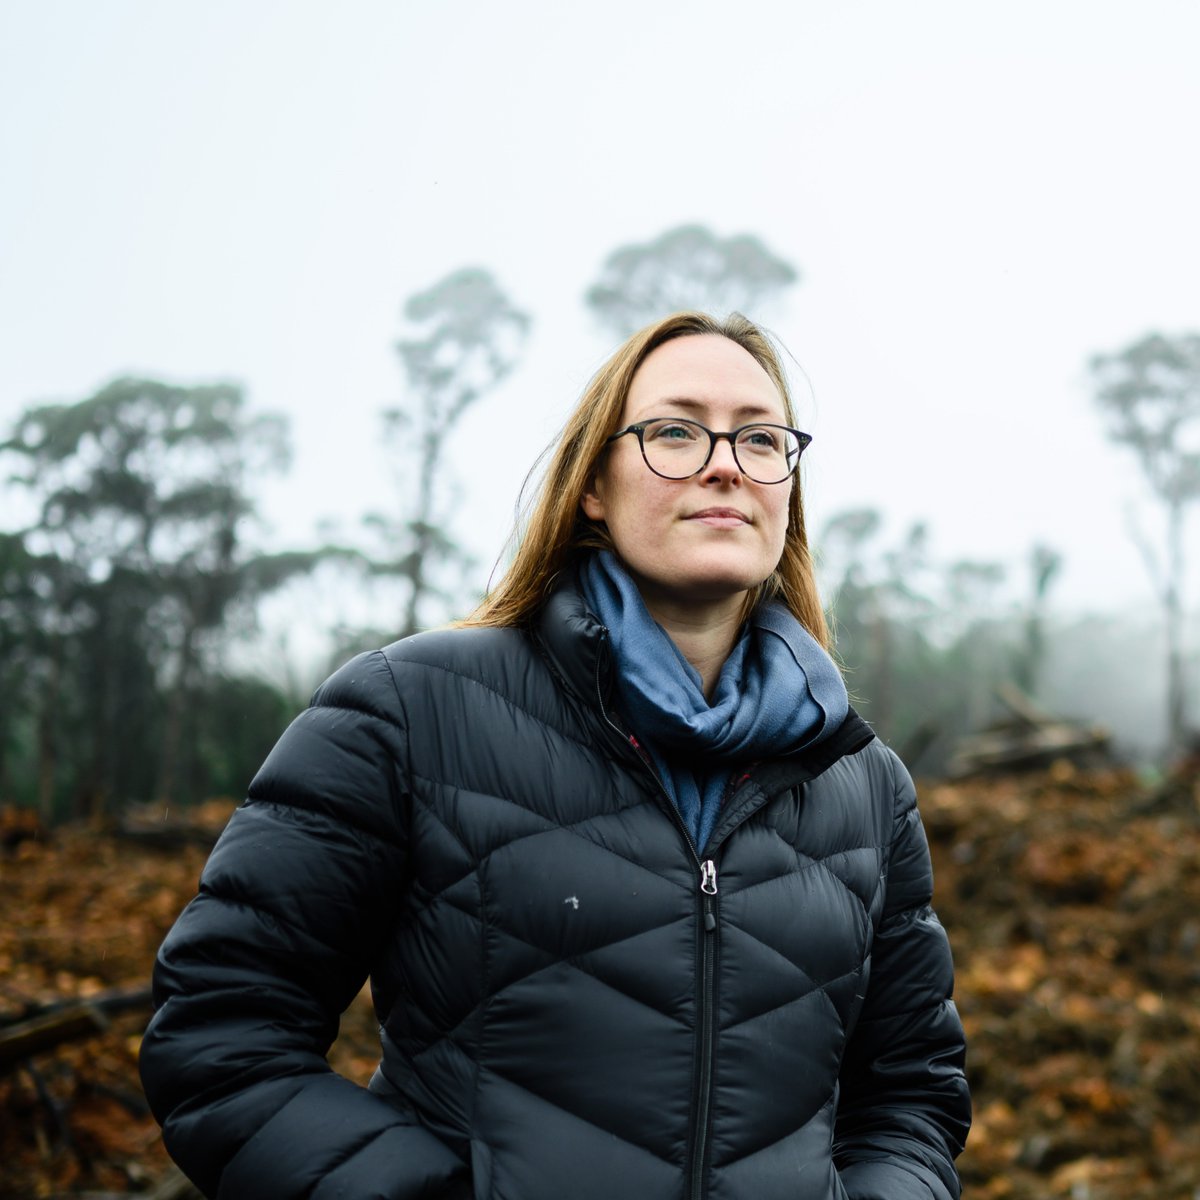 We have a once-in-a-generation opportunity to turn some of Victoria’s most precious native forests into a national park - but loggers and hunters are trying to stop it. Add your voice to the call for our forests to be protected for good: engage.vic.gov.au/central-highla…